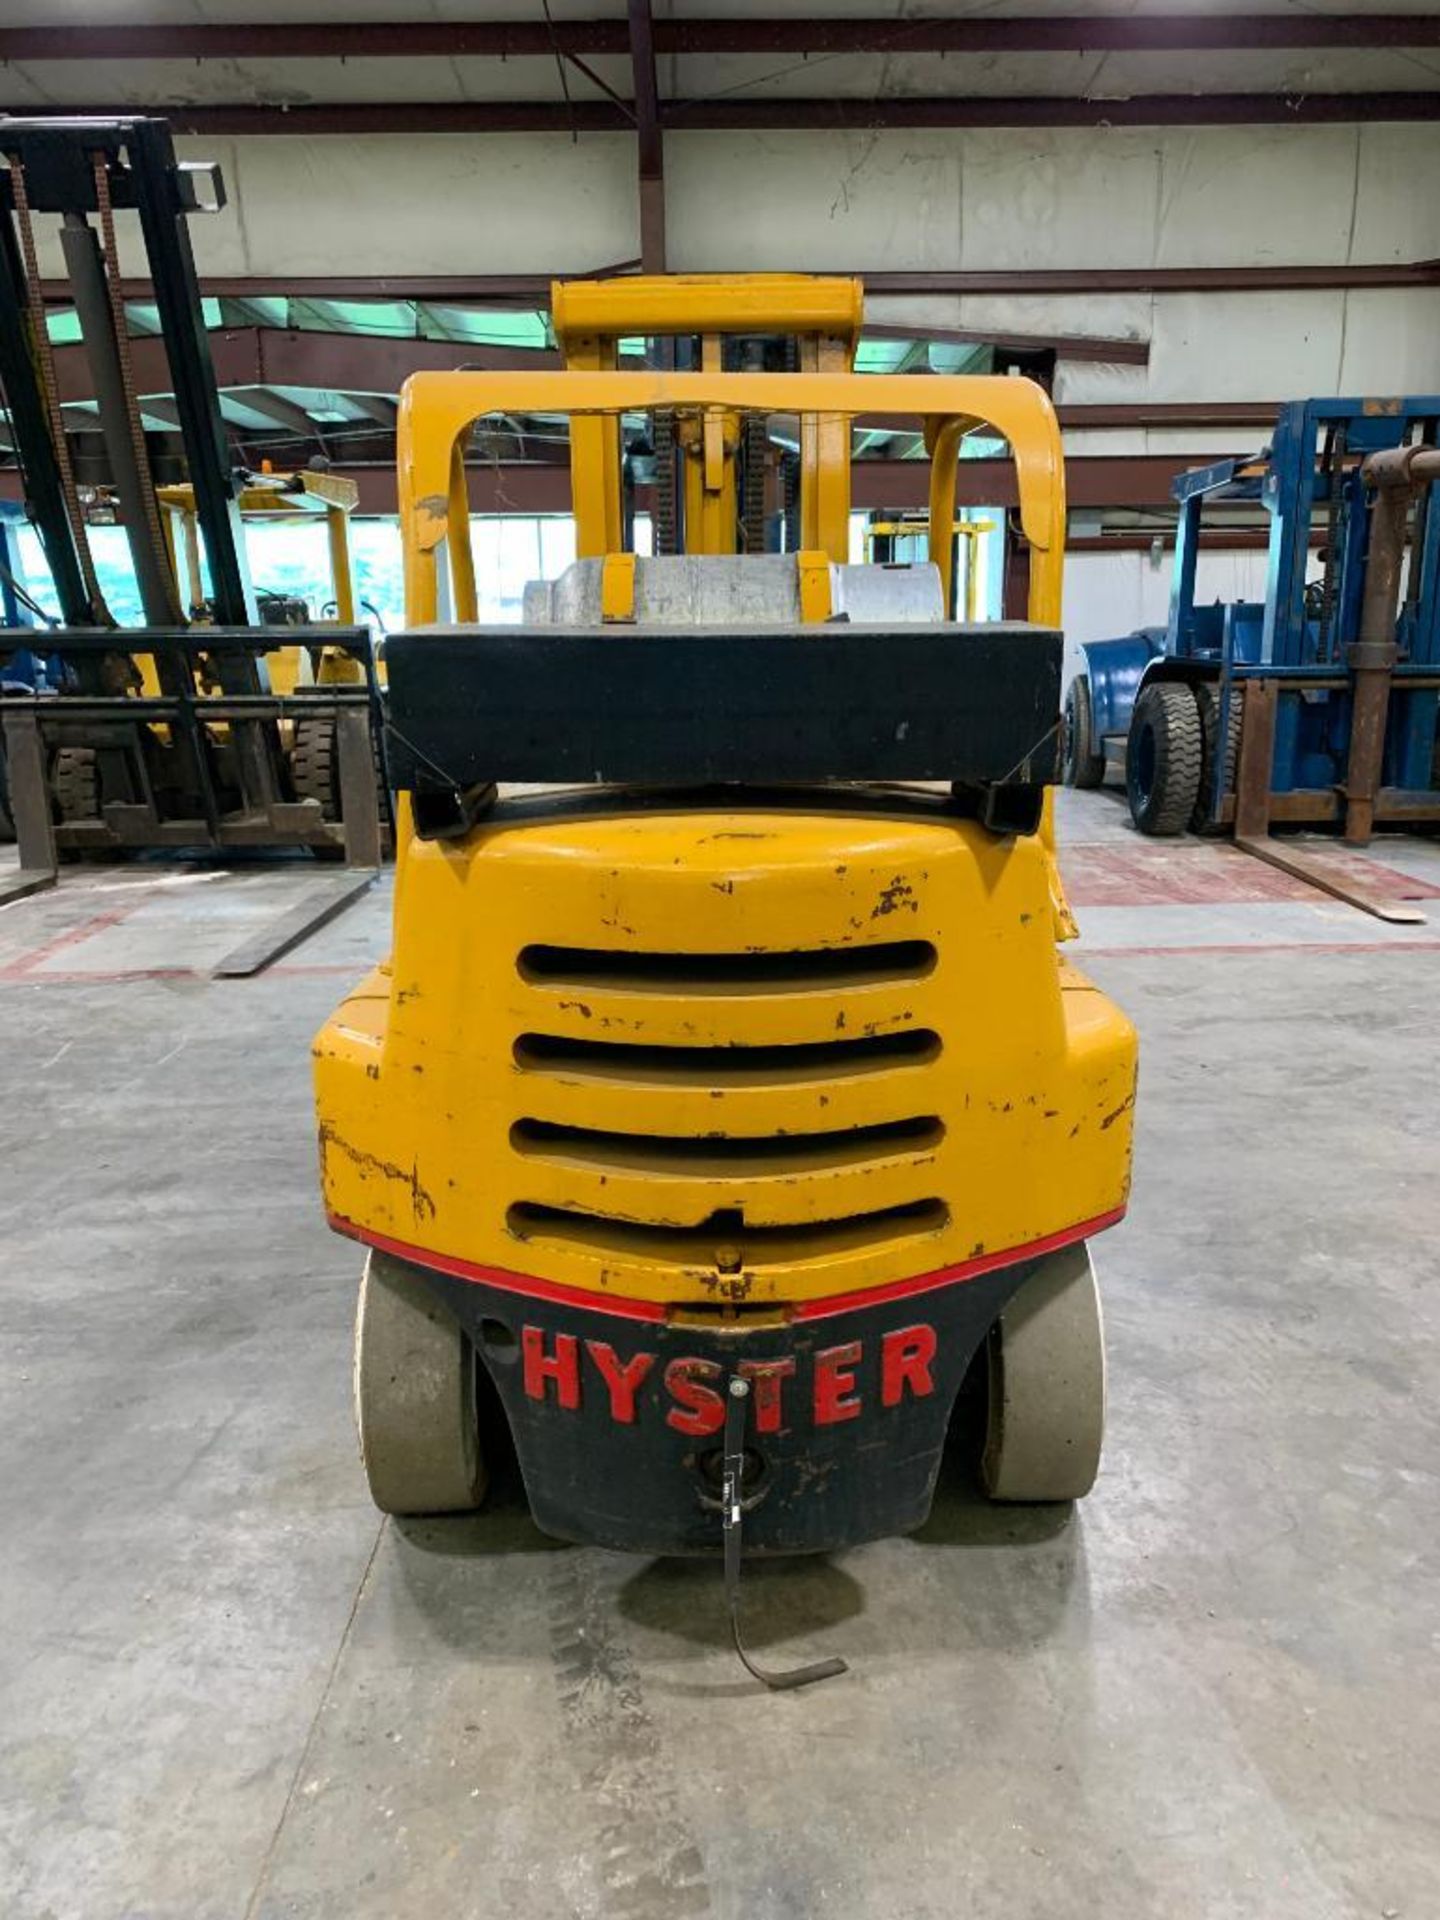 Hyster 15,000 lb. capacity forklift, model s150a, s/n a24d1707n, lpg, 3-speed manual transmission, s - Image 4 of 5